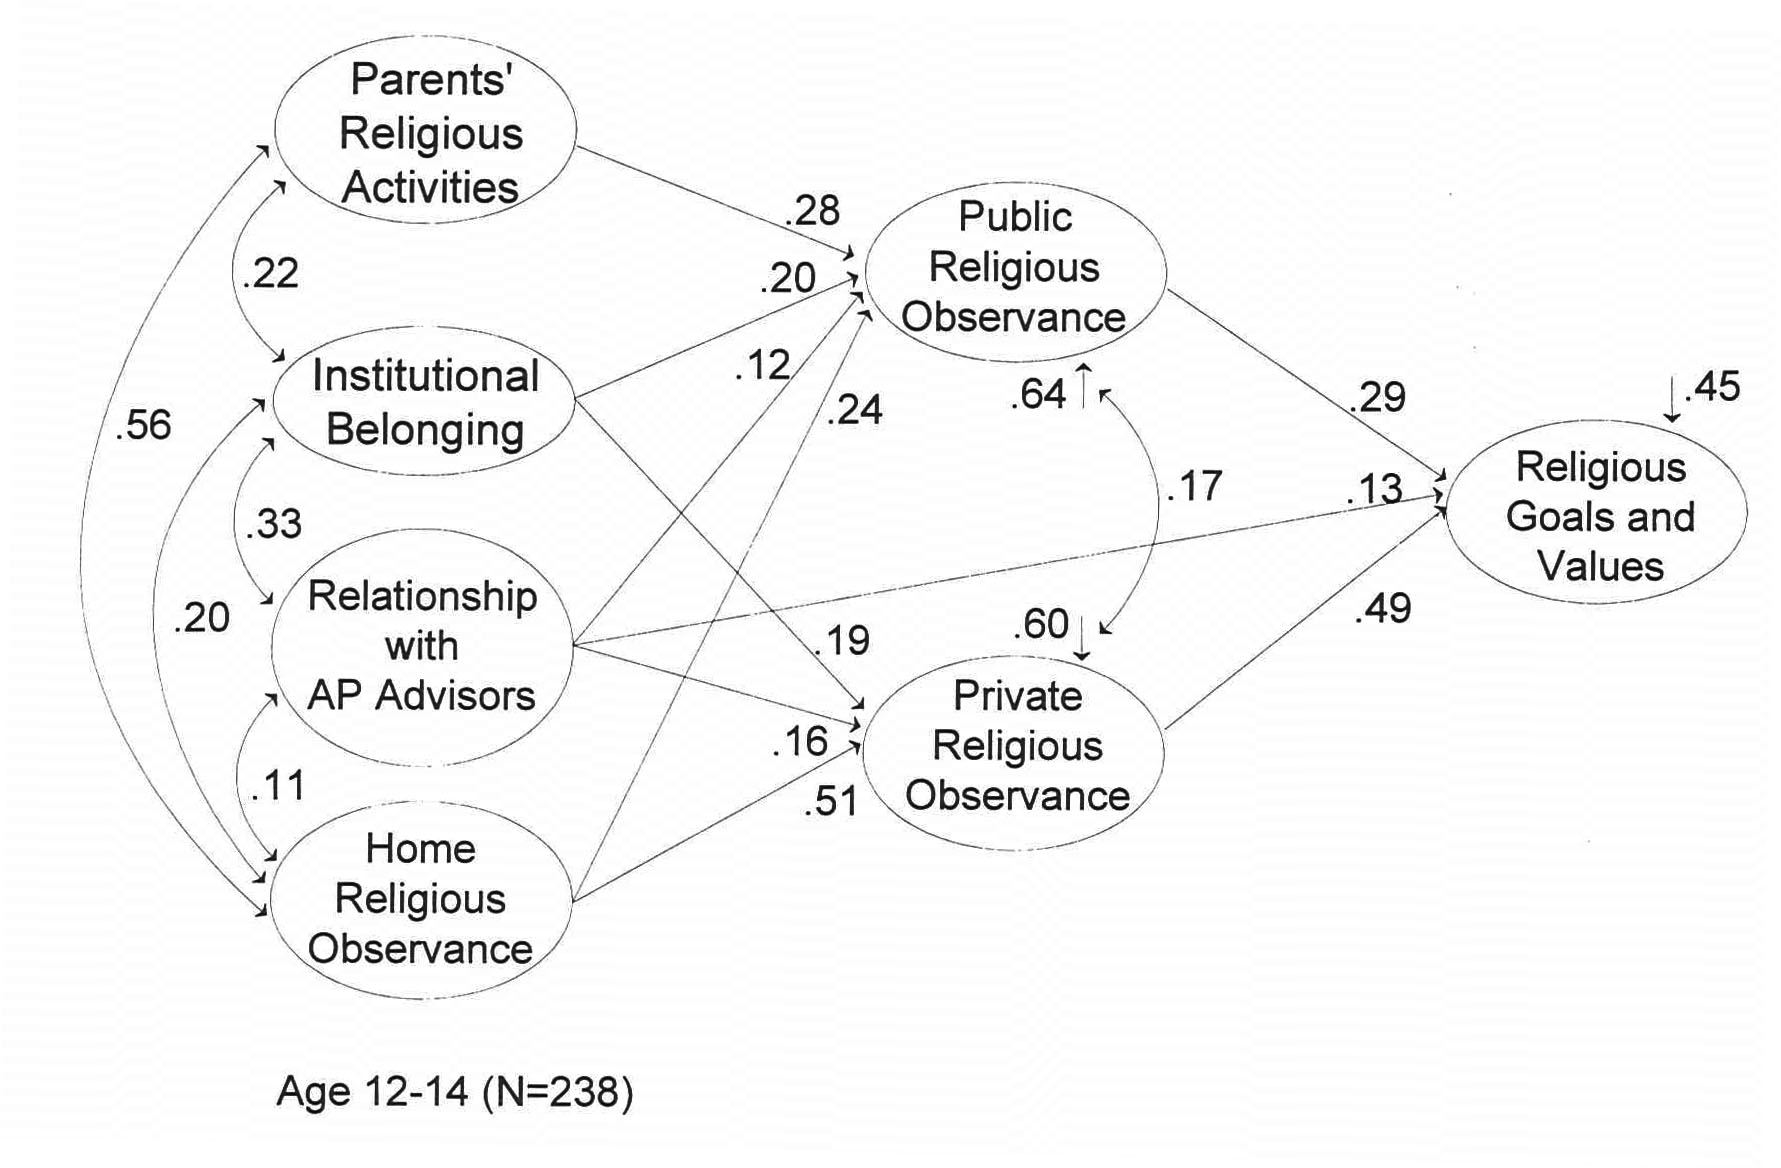 Family and Religion’s Influence on Religious Goals and Values